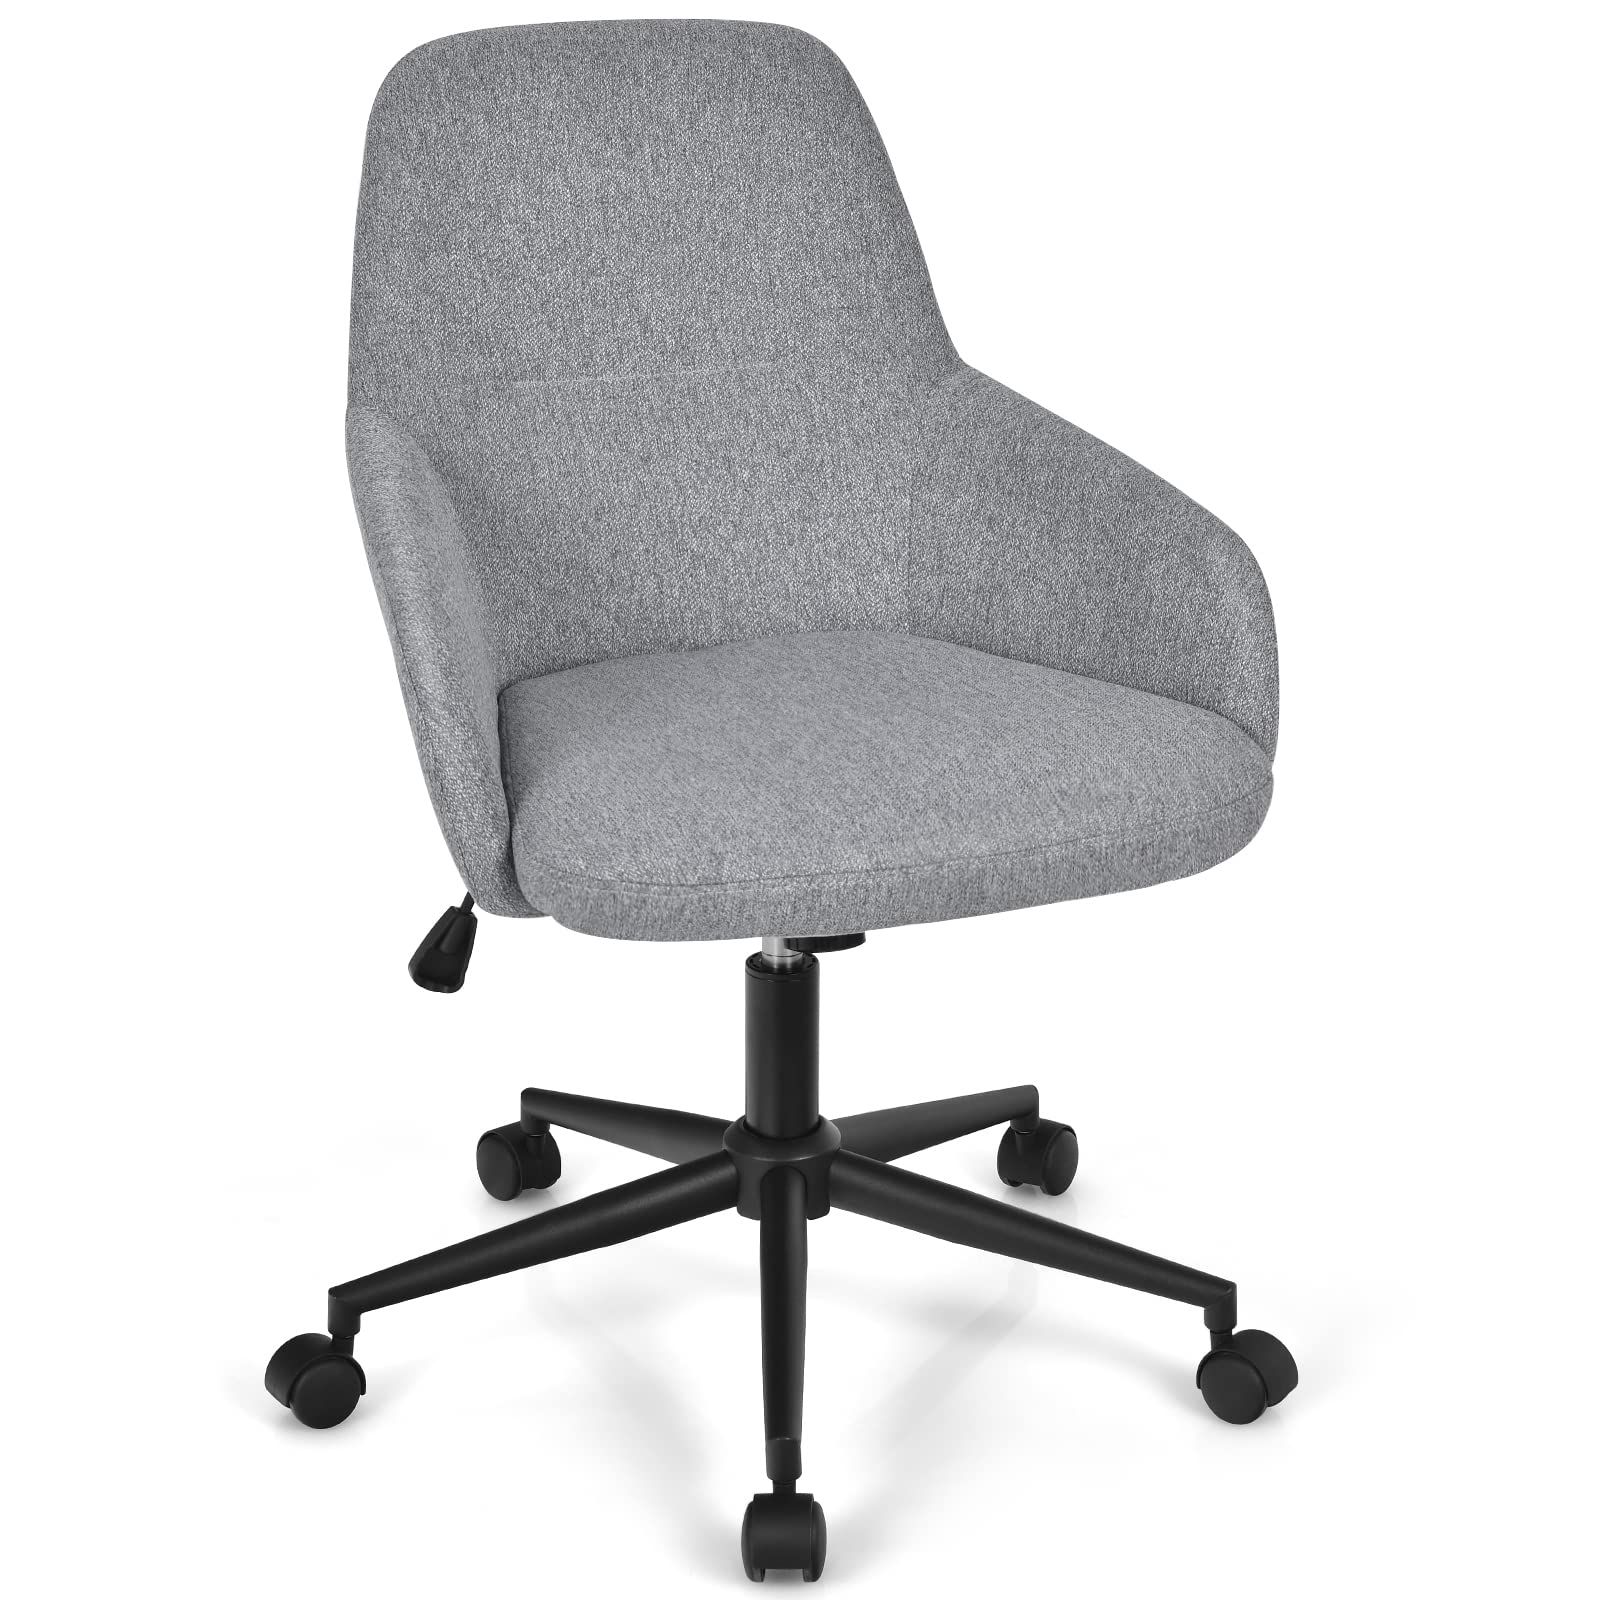 Fabric Office Chair, Upholstered Linen Leisure Chair